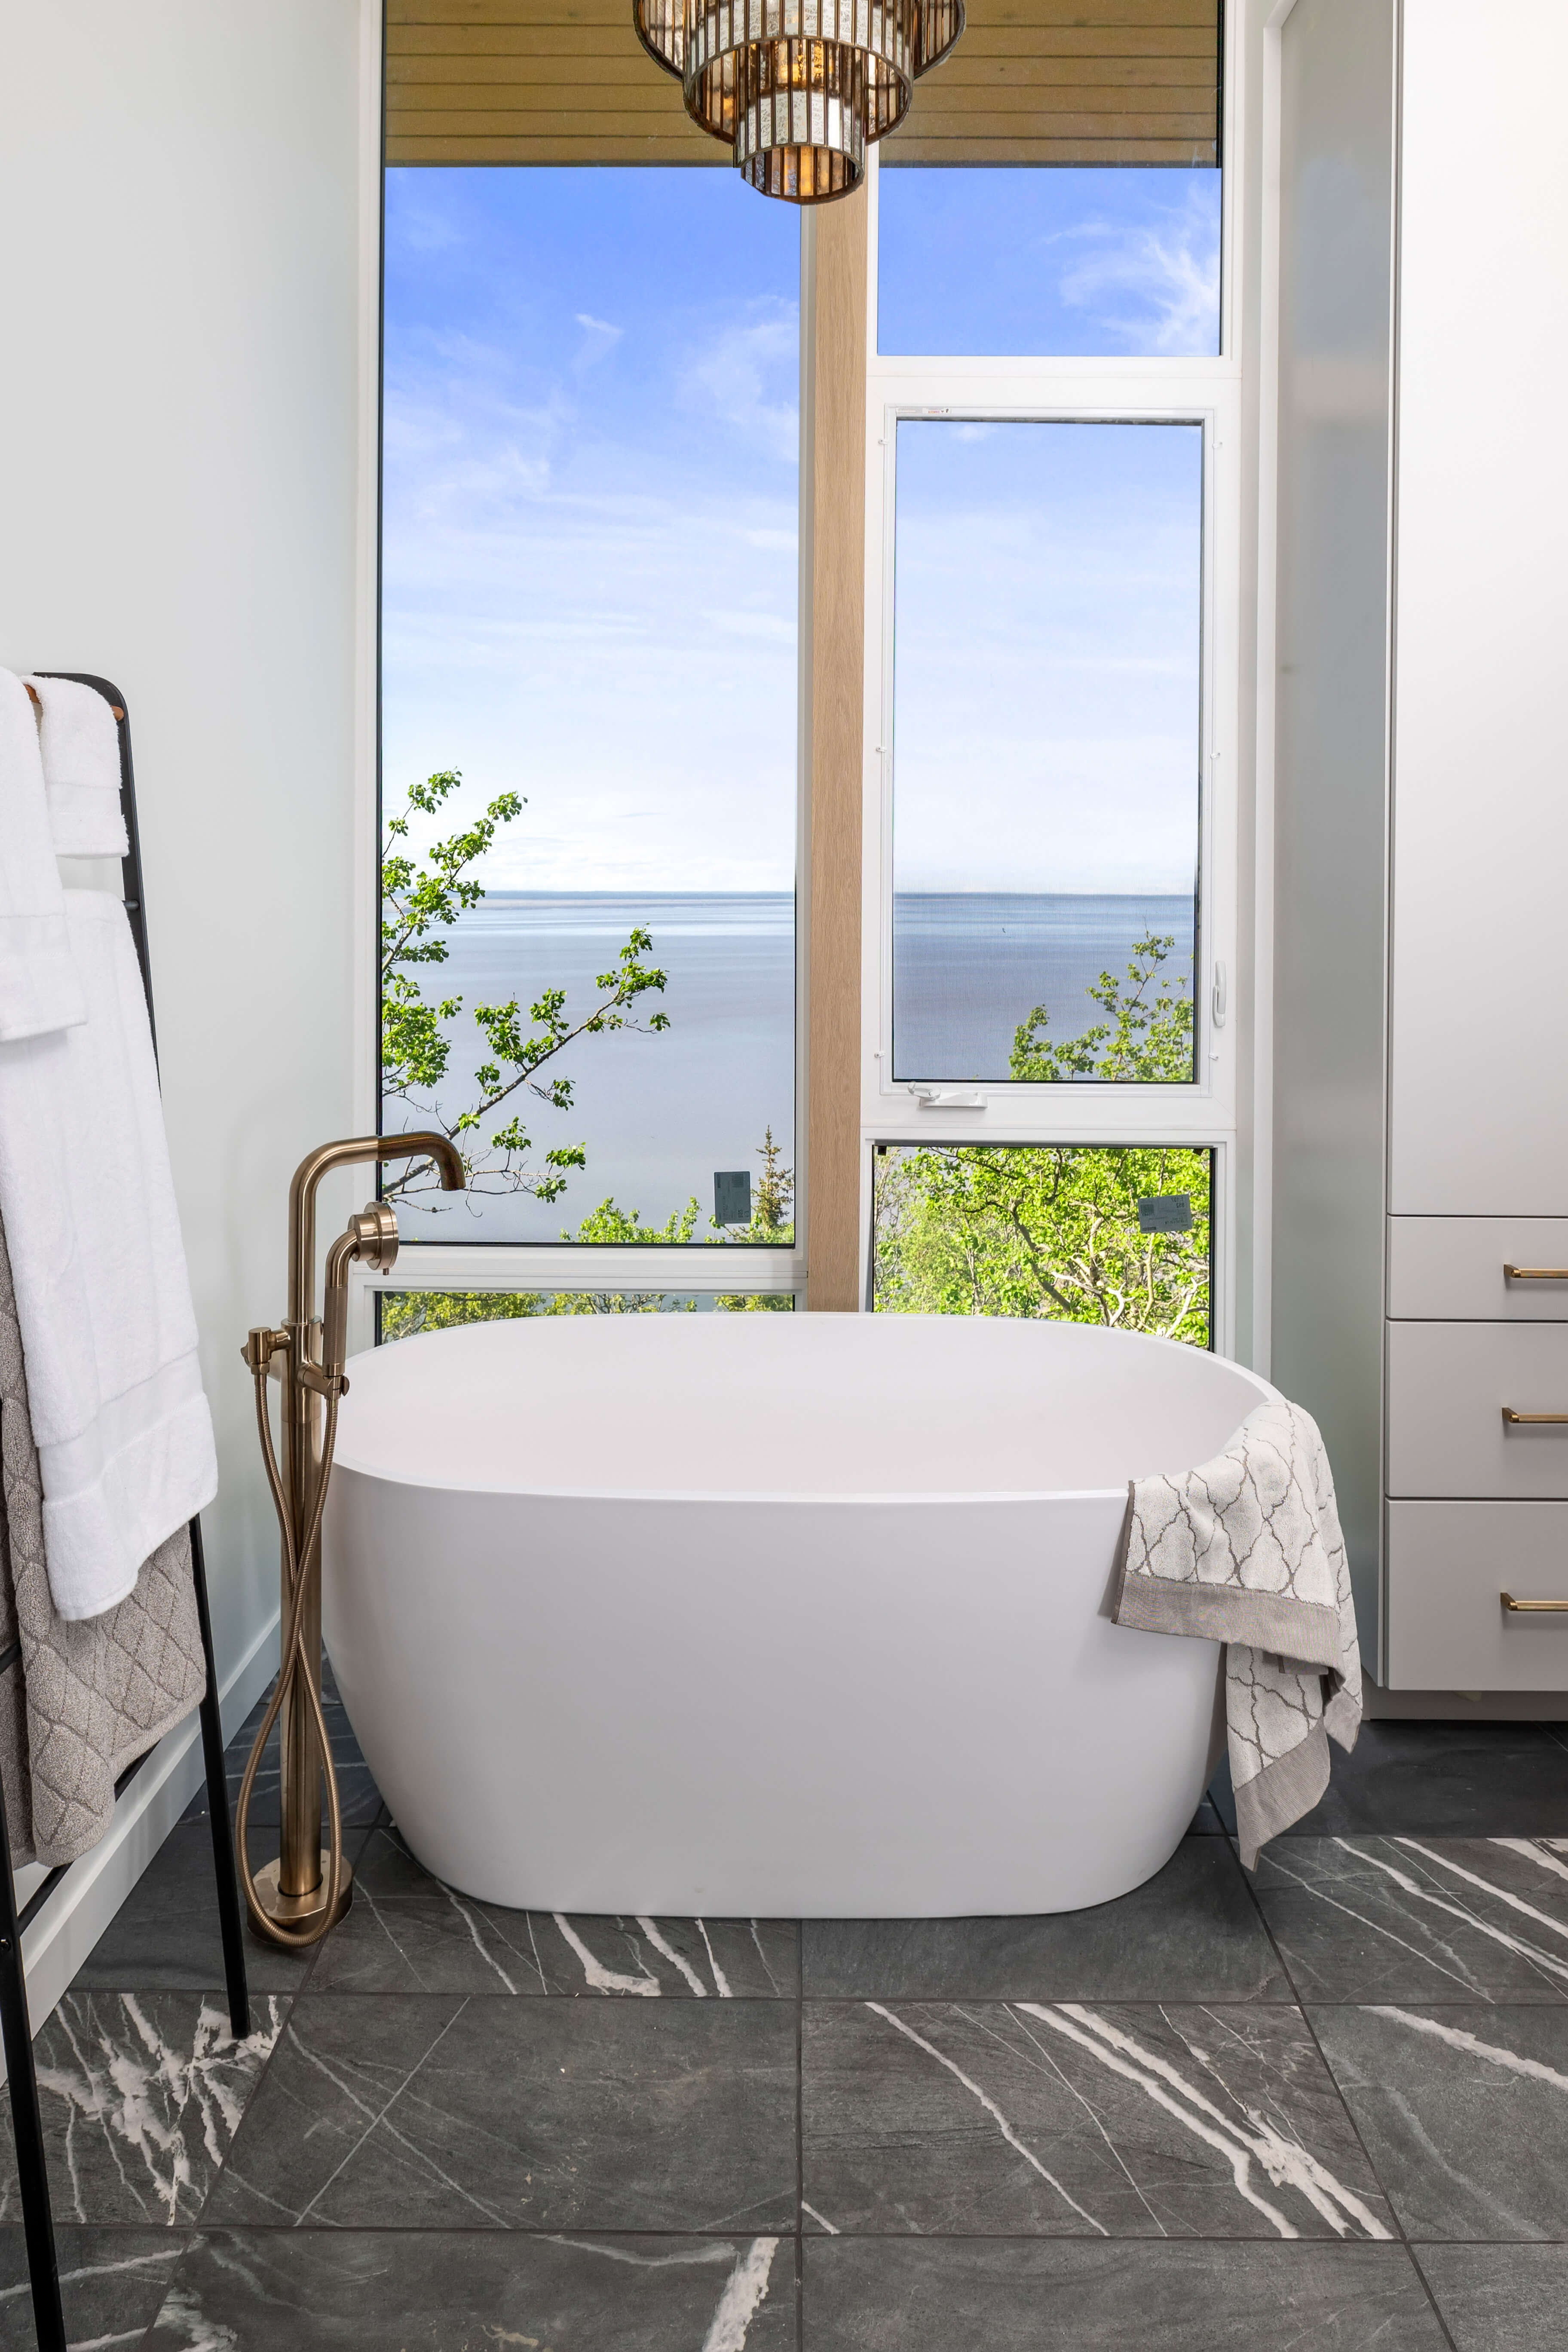 A master bathroom with a stunning window view from the freestanding soaking tub with tall linen cabinets from Dura Supreme.